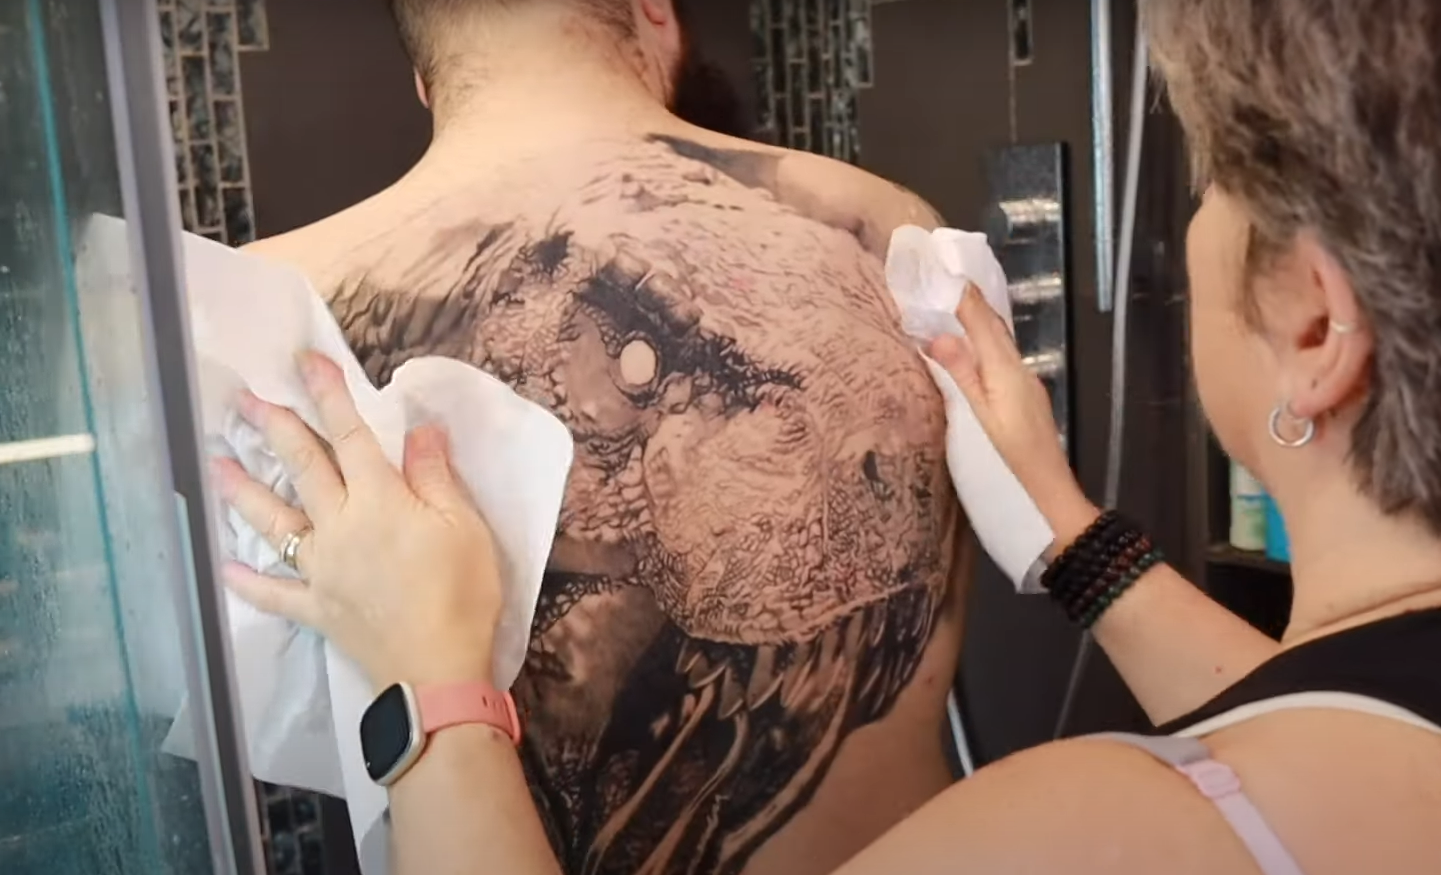 Is CeraVe Good For Your New Tattoo?